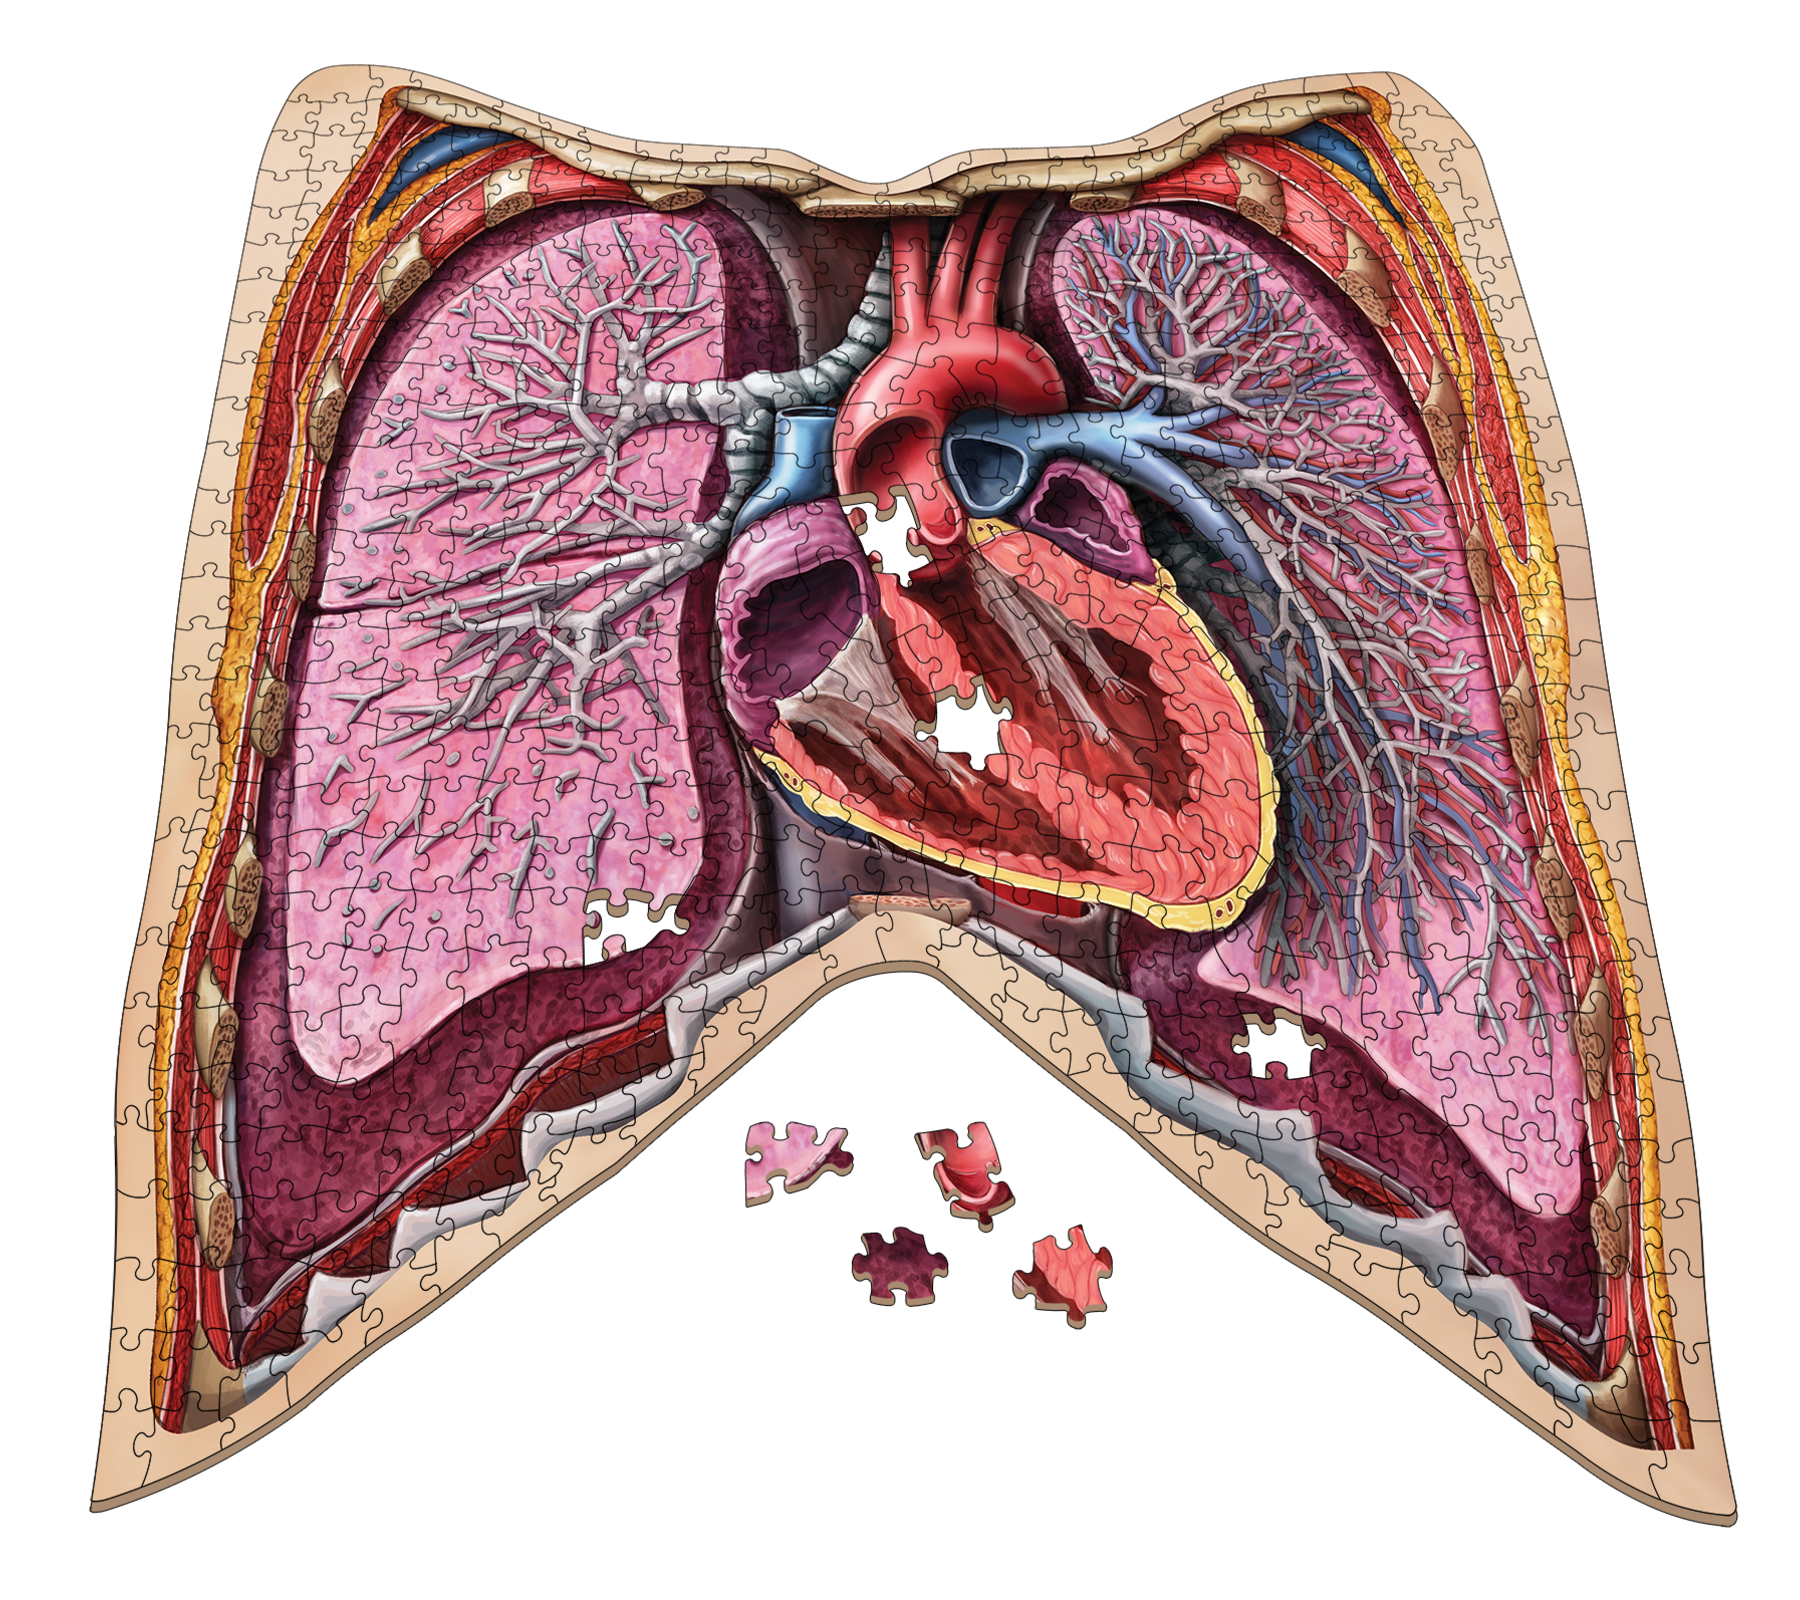 Human Thorax Anatomy Jigsaw Puzzle | Unique Shaped Science Puzzles with Accurate Medical Illustrations